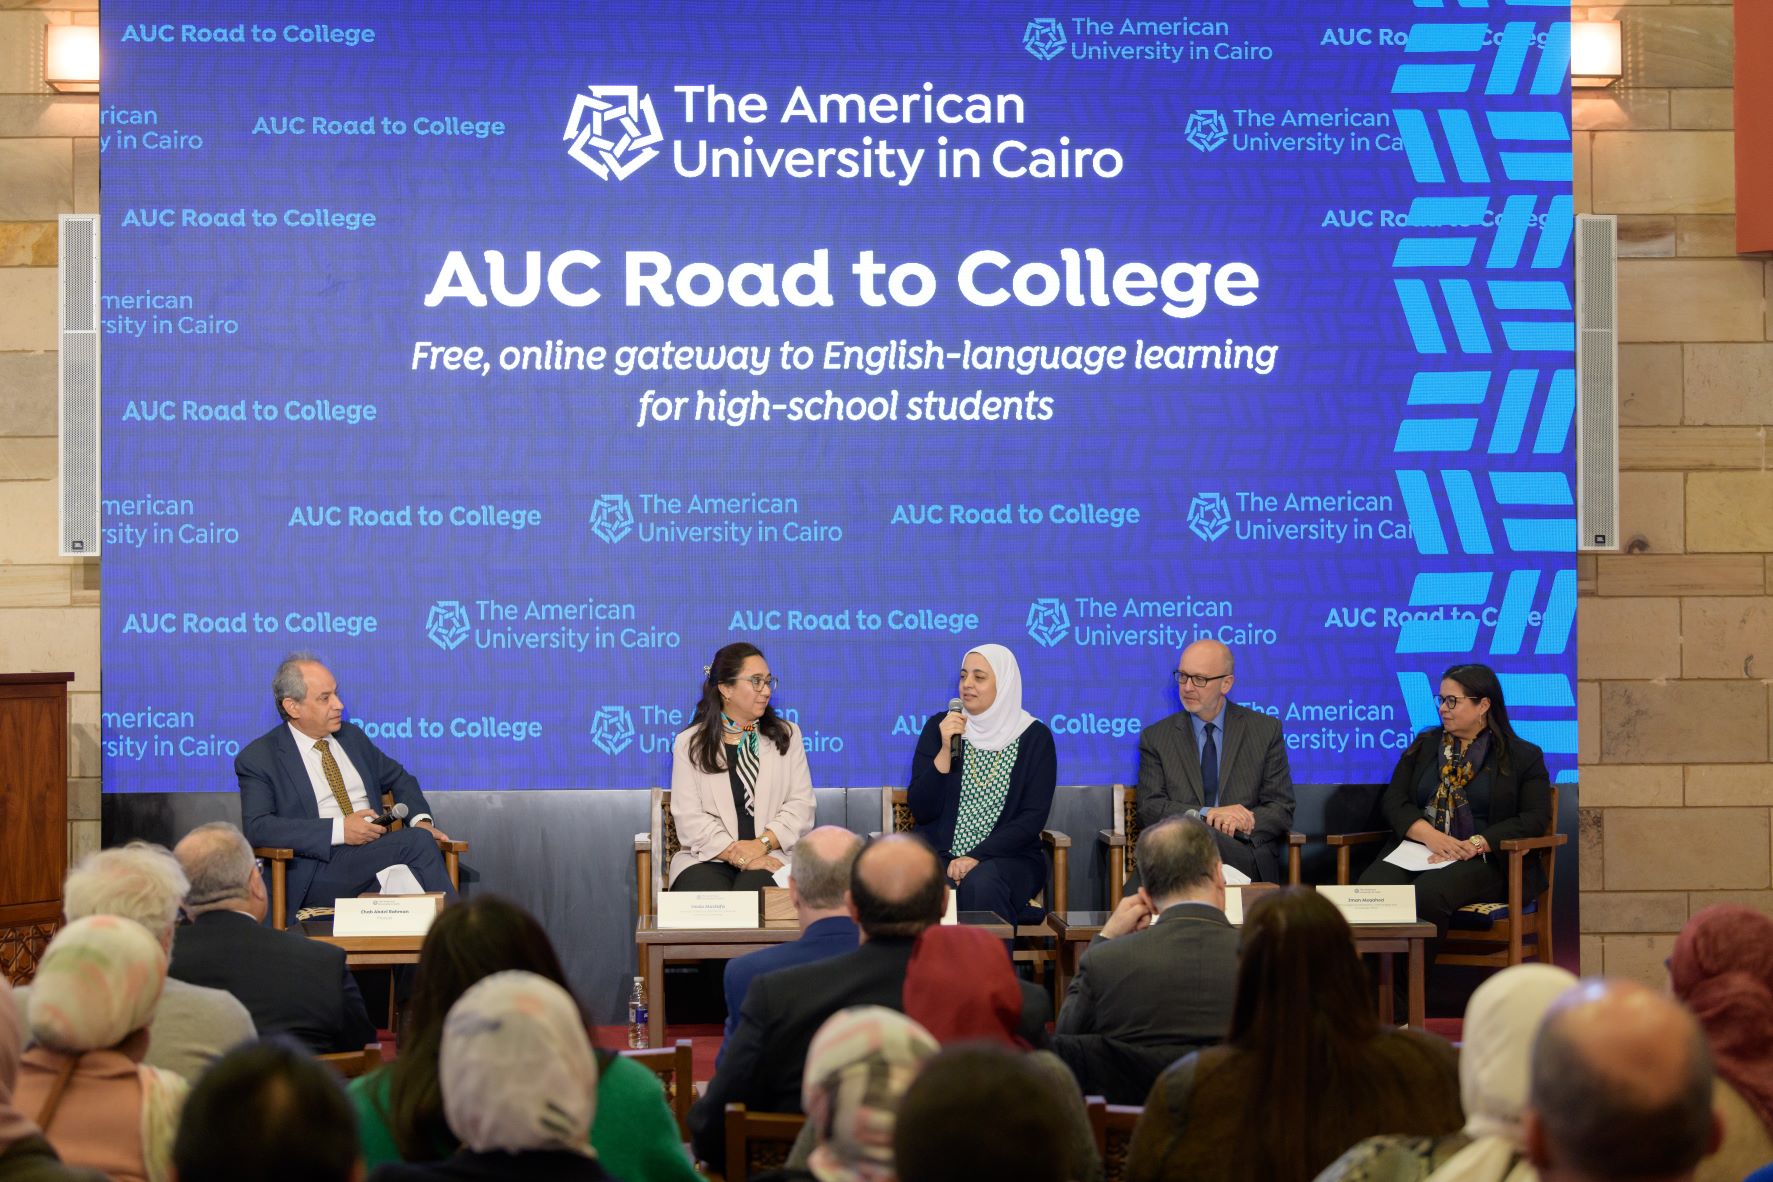 AUC Road to College Launch event